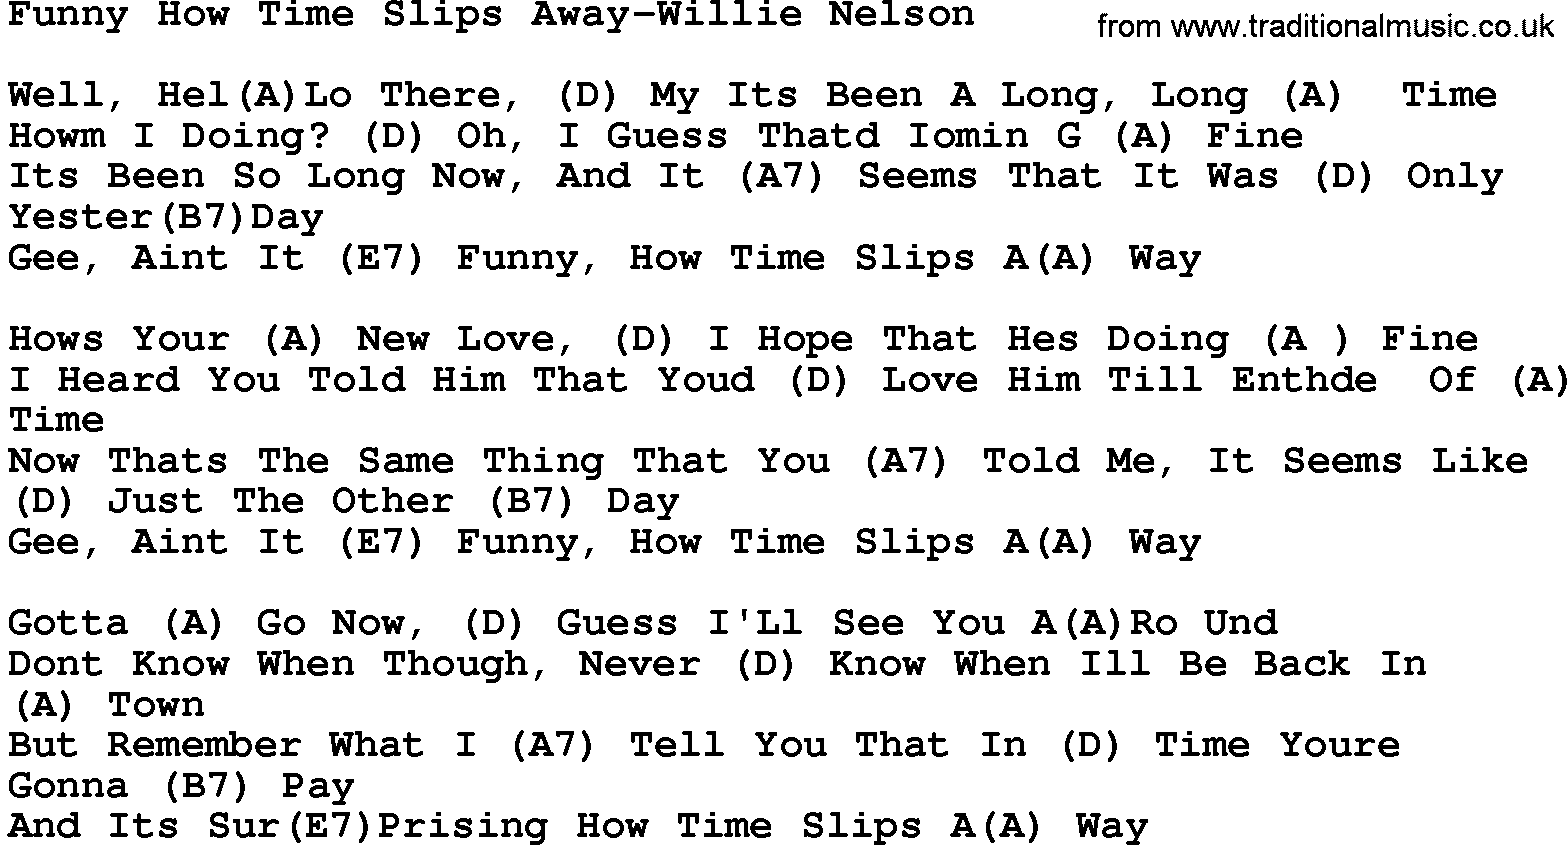 Country music song: Funny How Time Slips Away-Willie Nelson lyrics and chords